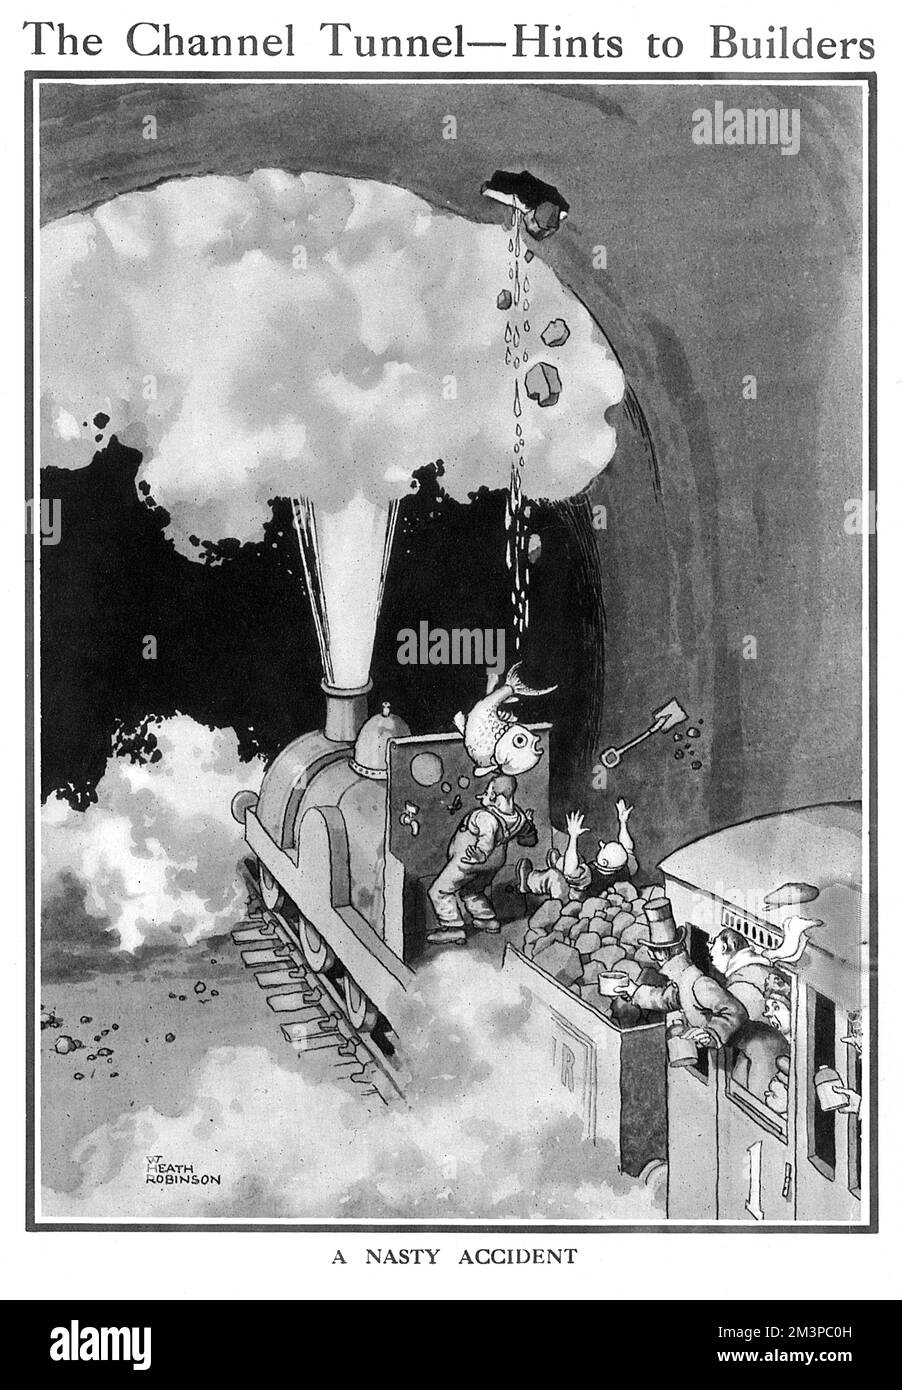 A Nasty Accident befalling the drivers of a Channel Tunnel train when a loose brick allows an enormous fish to fall on their head.  One of a number of disastrous scenarios dreamt up by William Heath Robinson if the building of the Channel Tunnel was to go ahead.       Date: 1919 Stock Photo